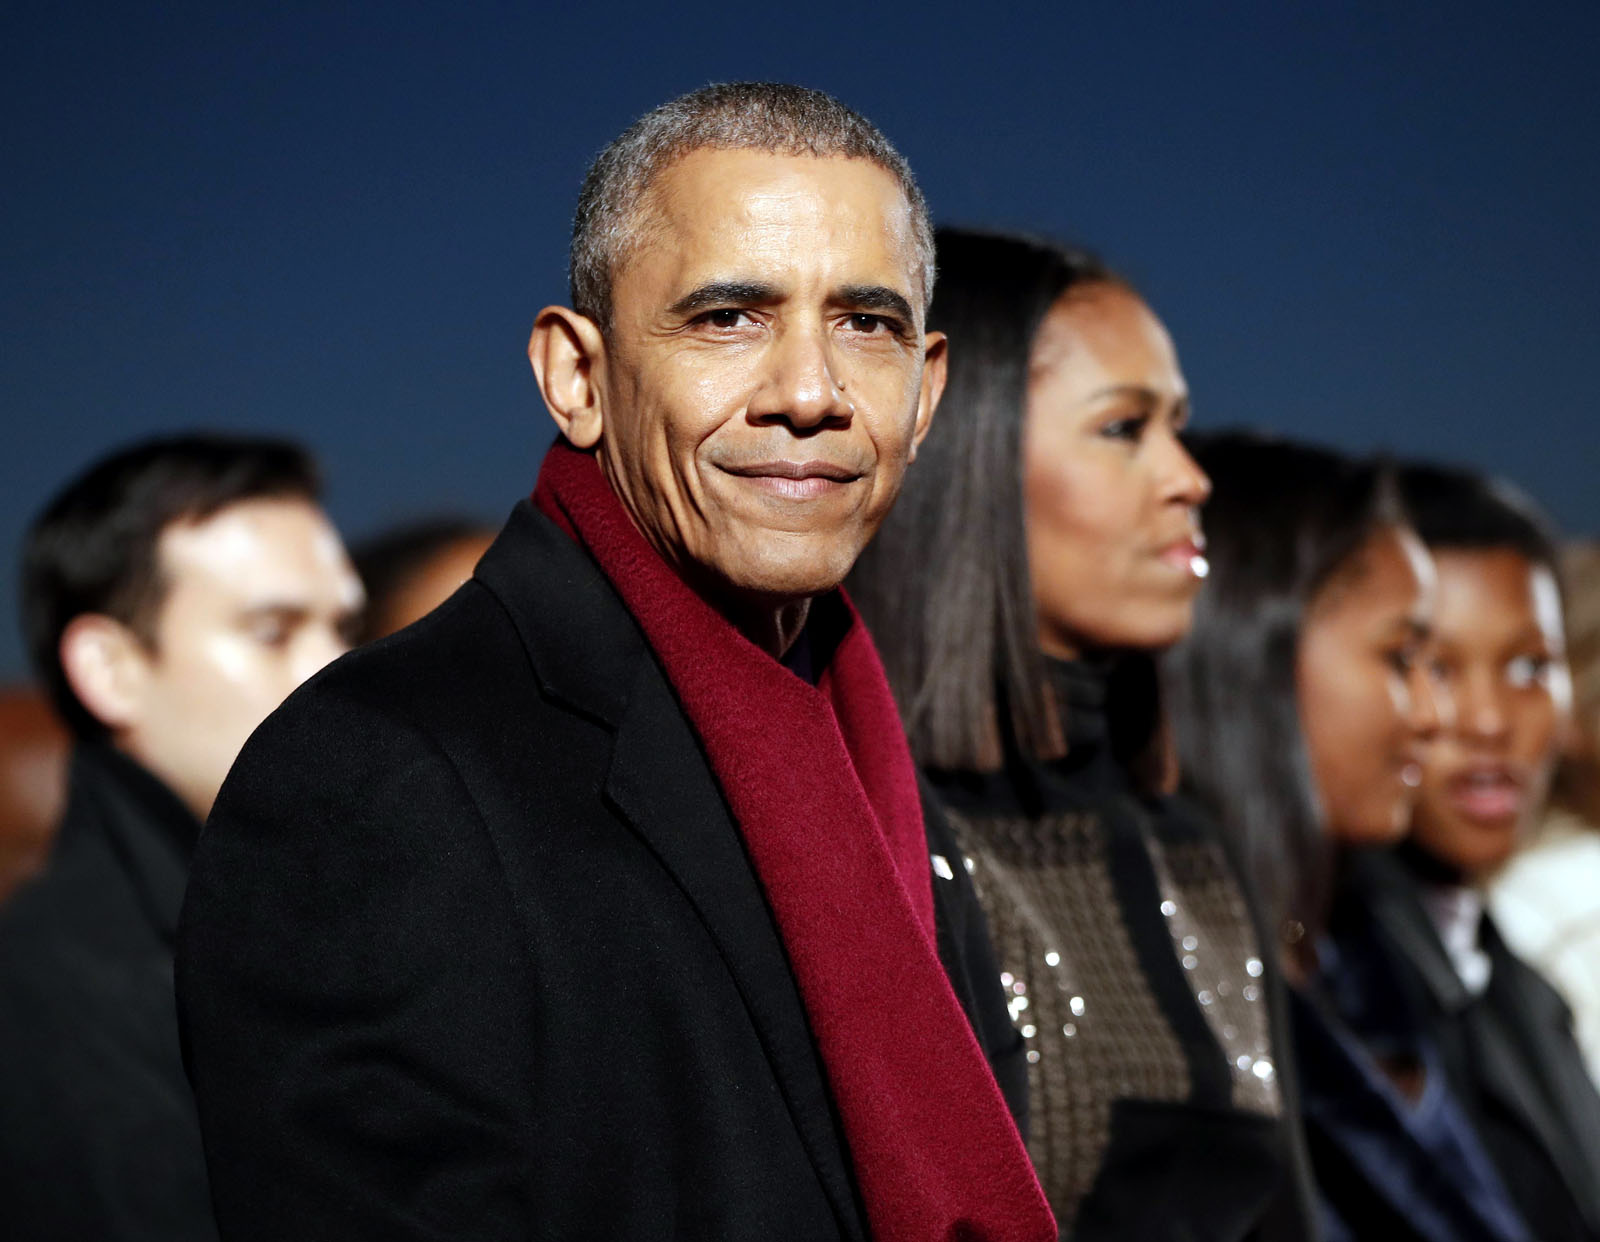 President Barack Obama, sits with first lady Michelle Obama, center, and their daughter Sasha, right, to watch the musical performances at the lighting the 2016 National Christmas Tree ceremony at the Ellipse near the White House in Washington, Thursday, Dec. 1, 2016. (AP Photo/Pablo Martinez Monsivais)